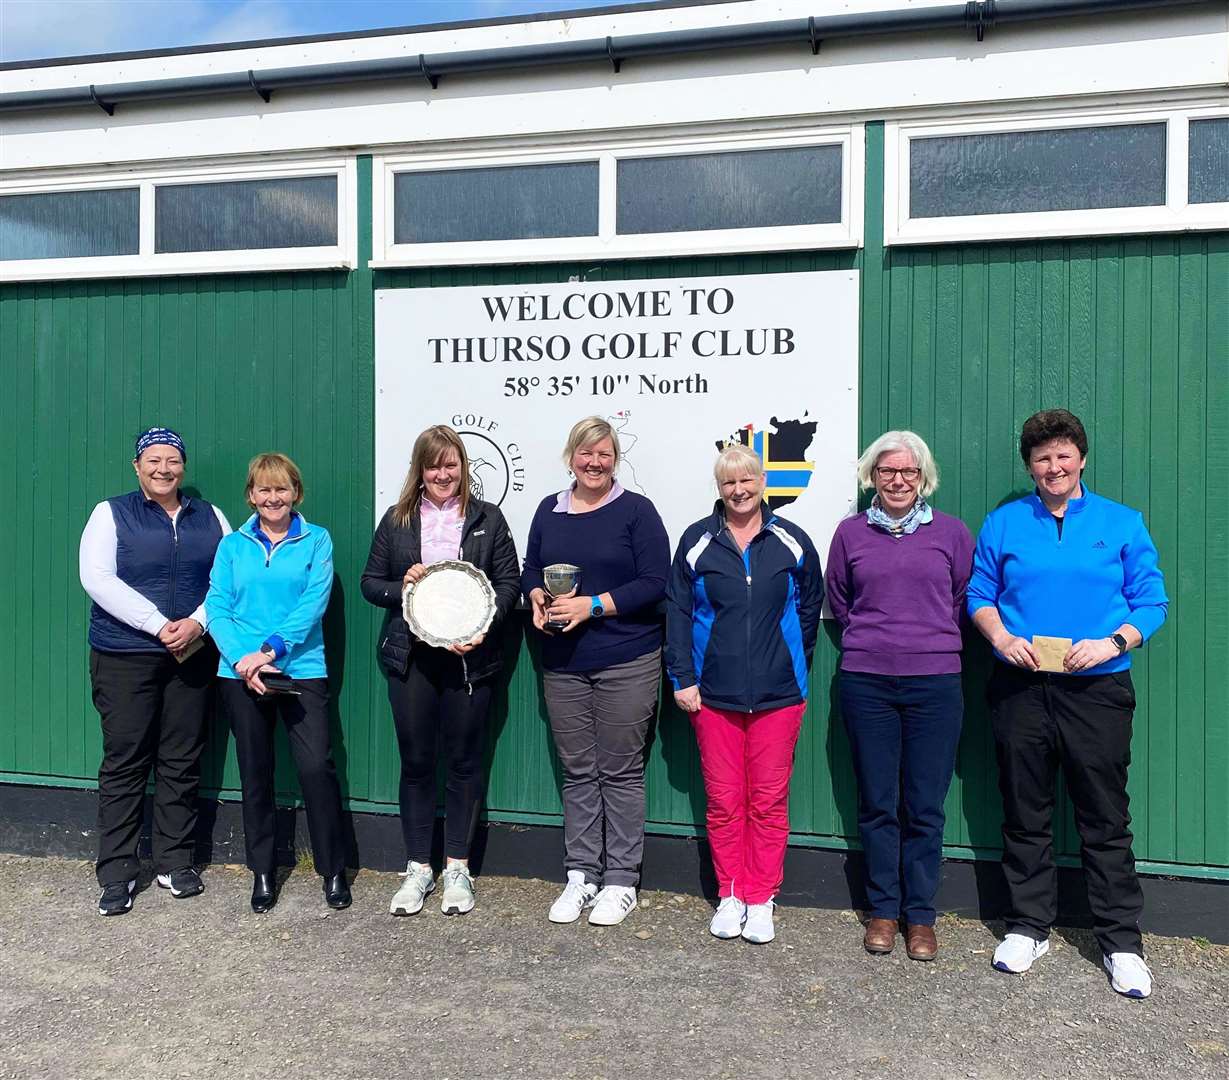 From left: Hilary Geddes, Alison Ross, Rachel Durrand, Laura Durrand, Pauline Craig, Fiona McLeod and Dee Macangus after the Navcommsta Open at Thurso.